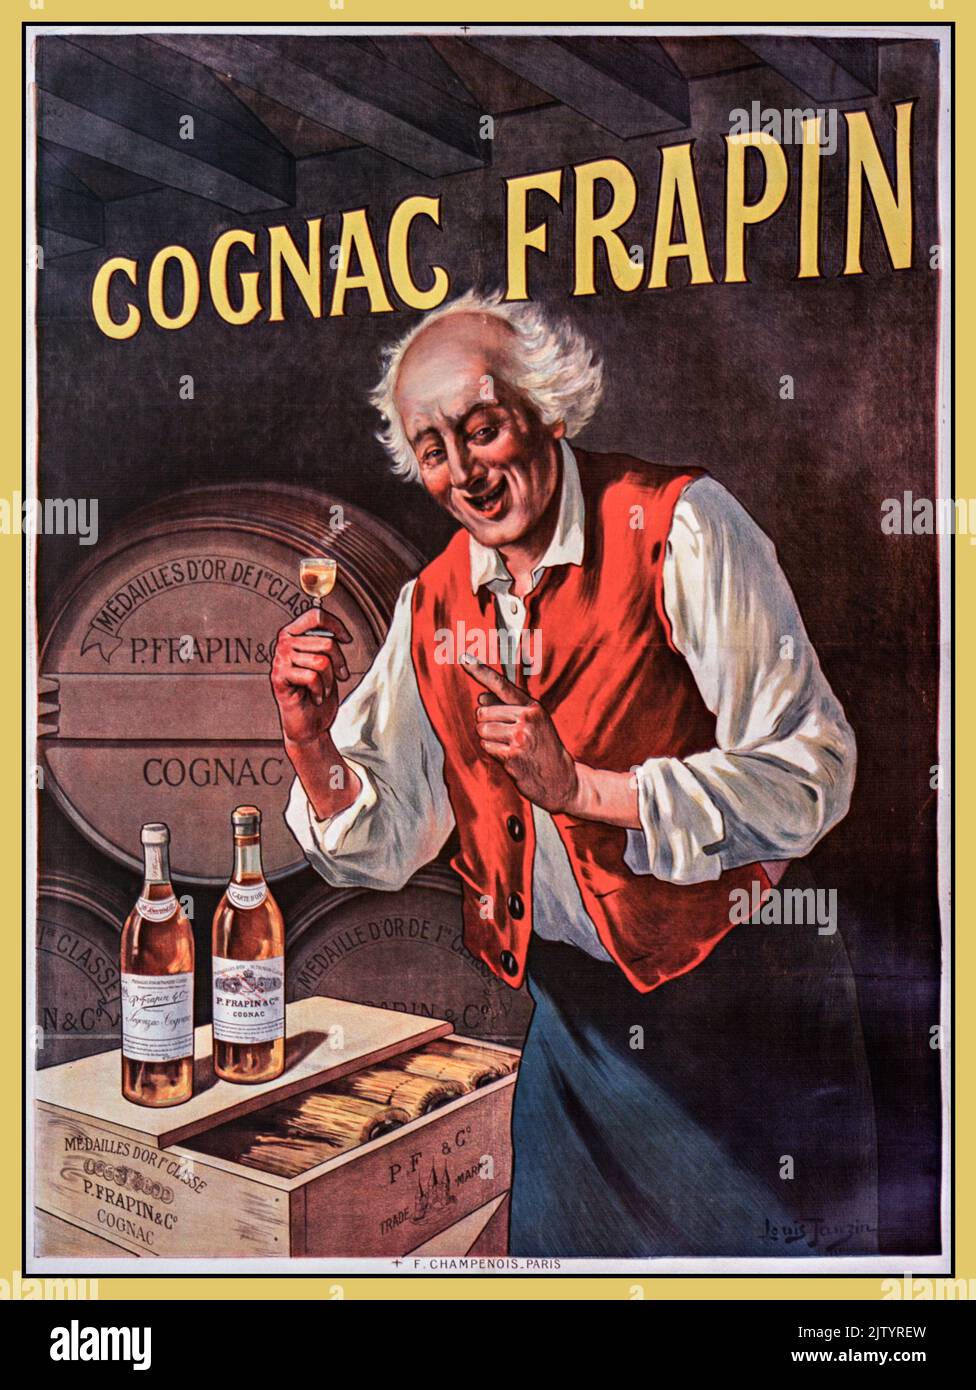 COGNAC FRAPIN Vintage French Alcohol Drinks Advertising Poster for Cognac. Cognac Frapin - by Tauzin Louis (1900). Stock Photo